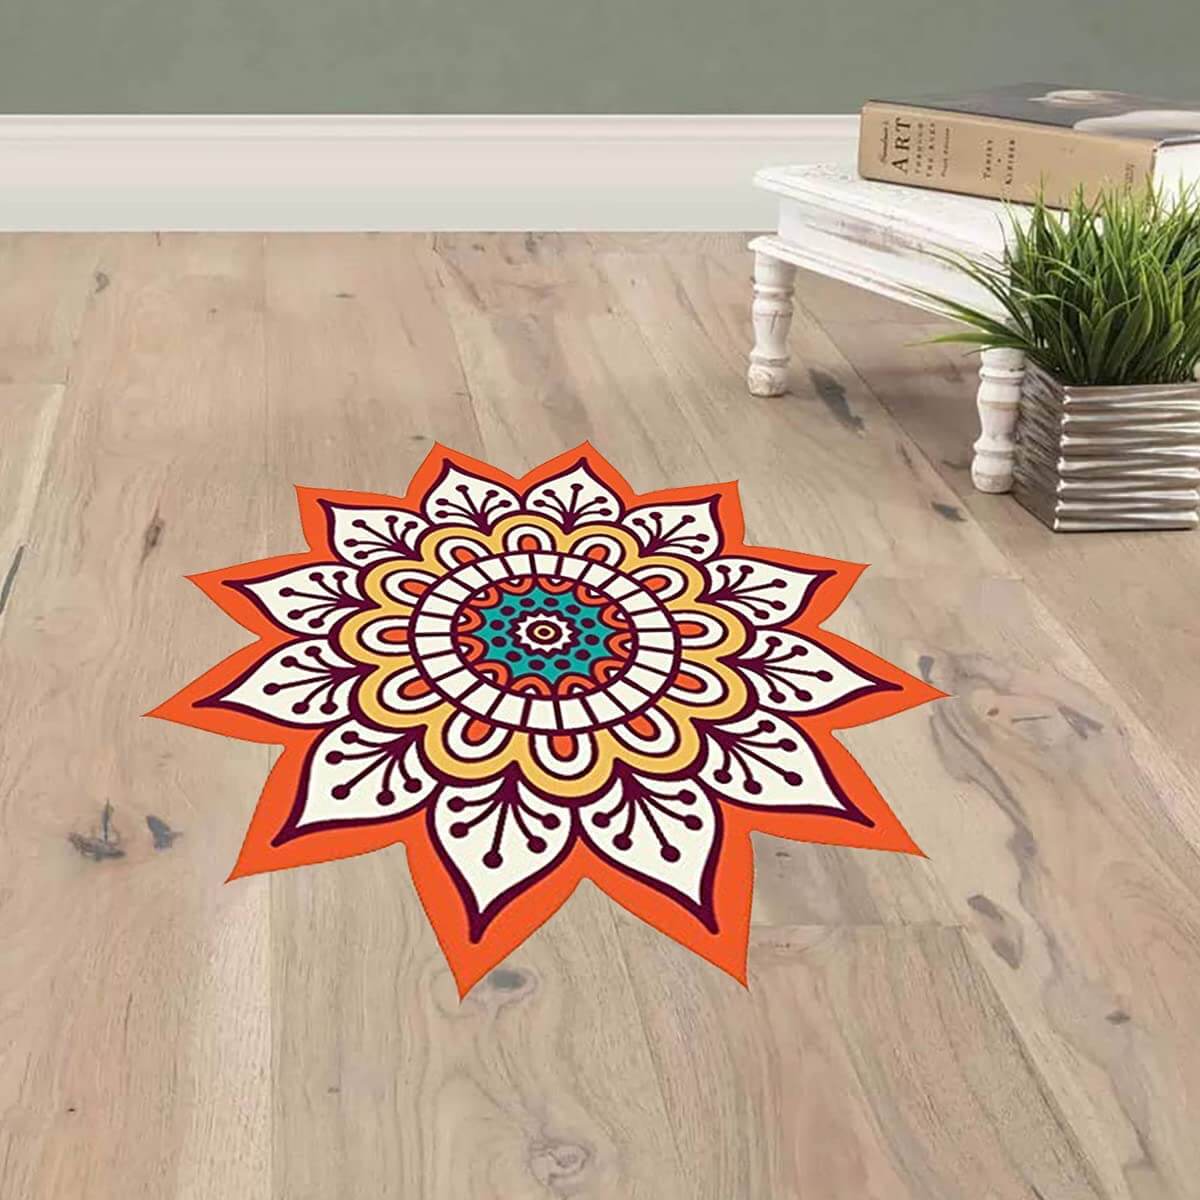 Festival 'Rangoli Pattern' Wall / Floor Waterproof and Durable Sticker (PVC Vinyl, 60 x 60 cm) Mangal Fashions | Indian Home Decor and Craft